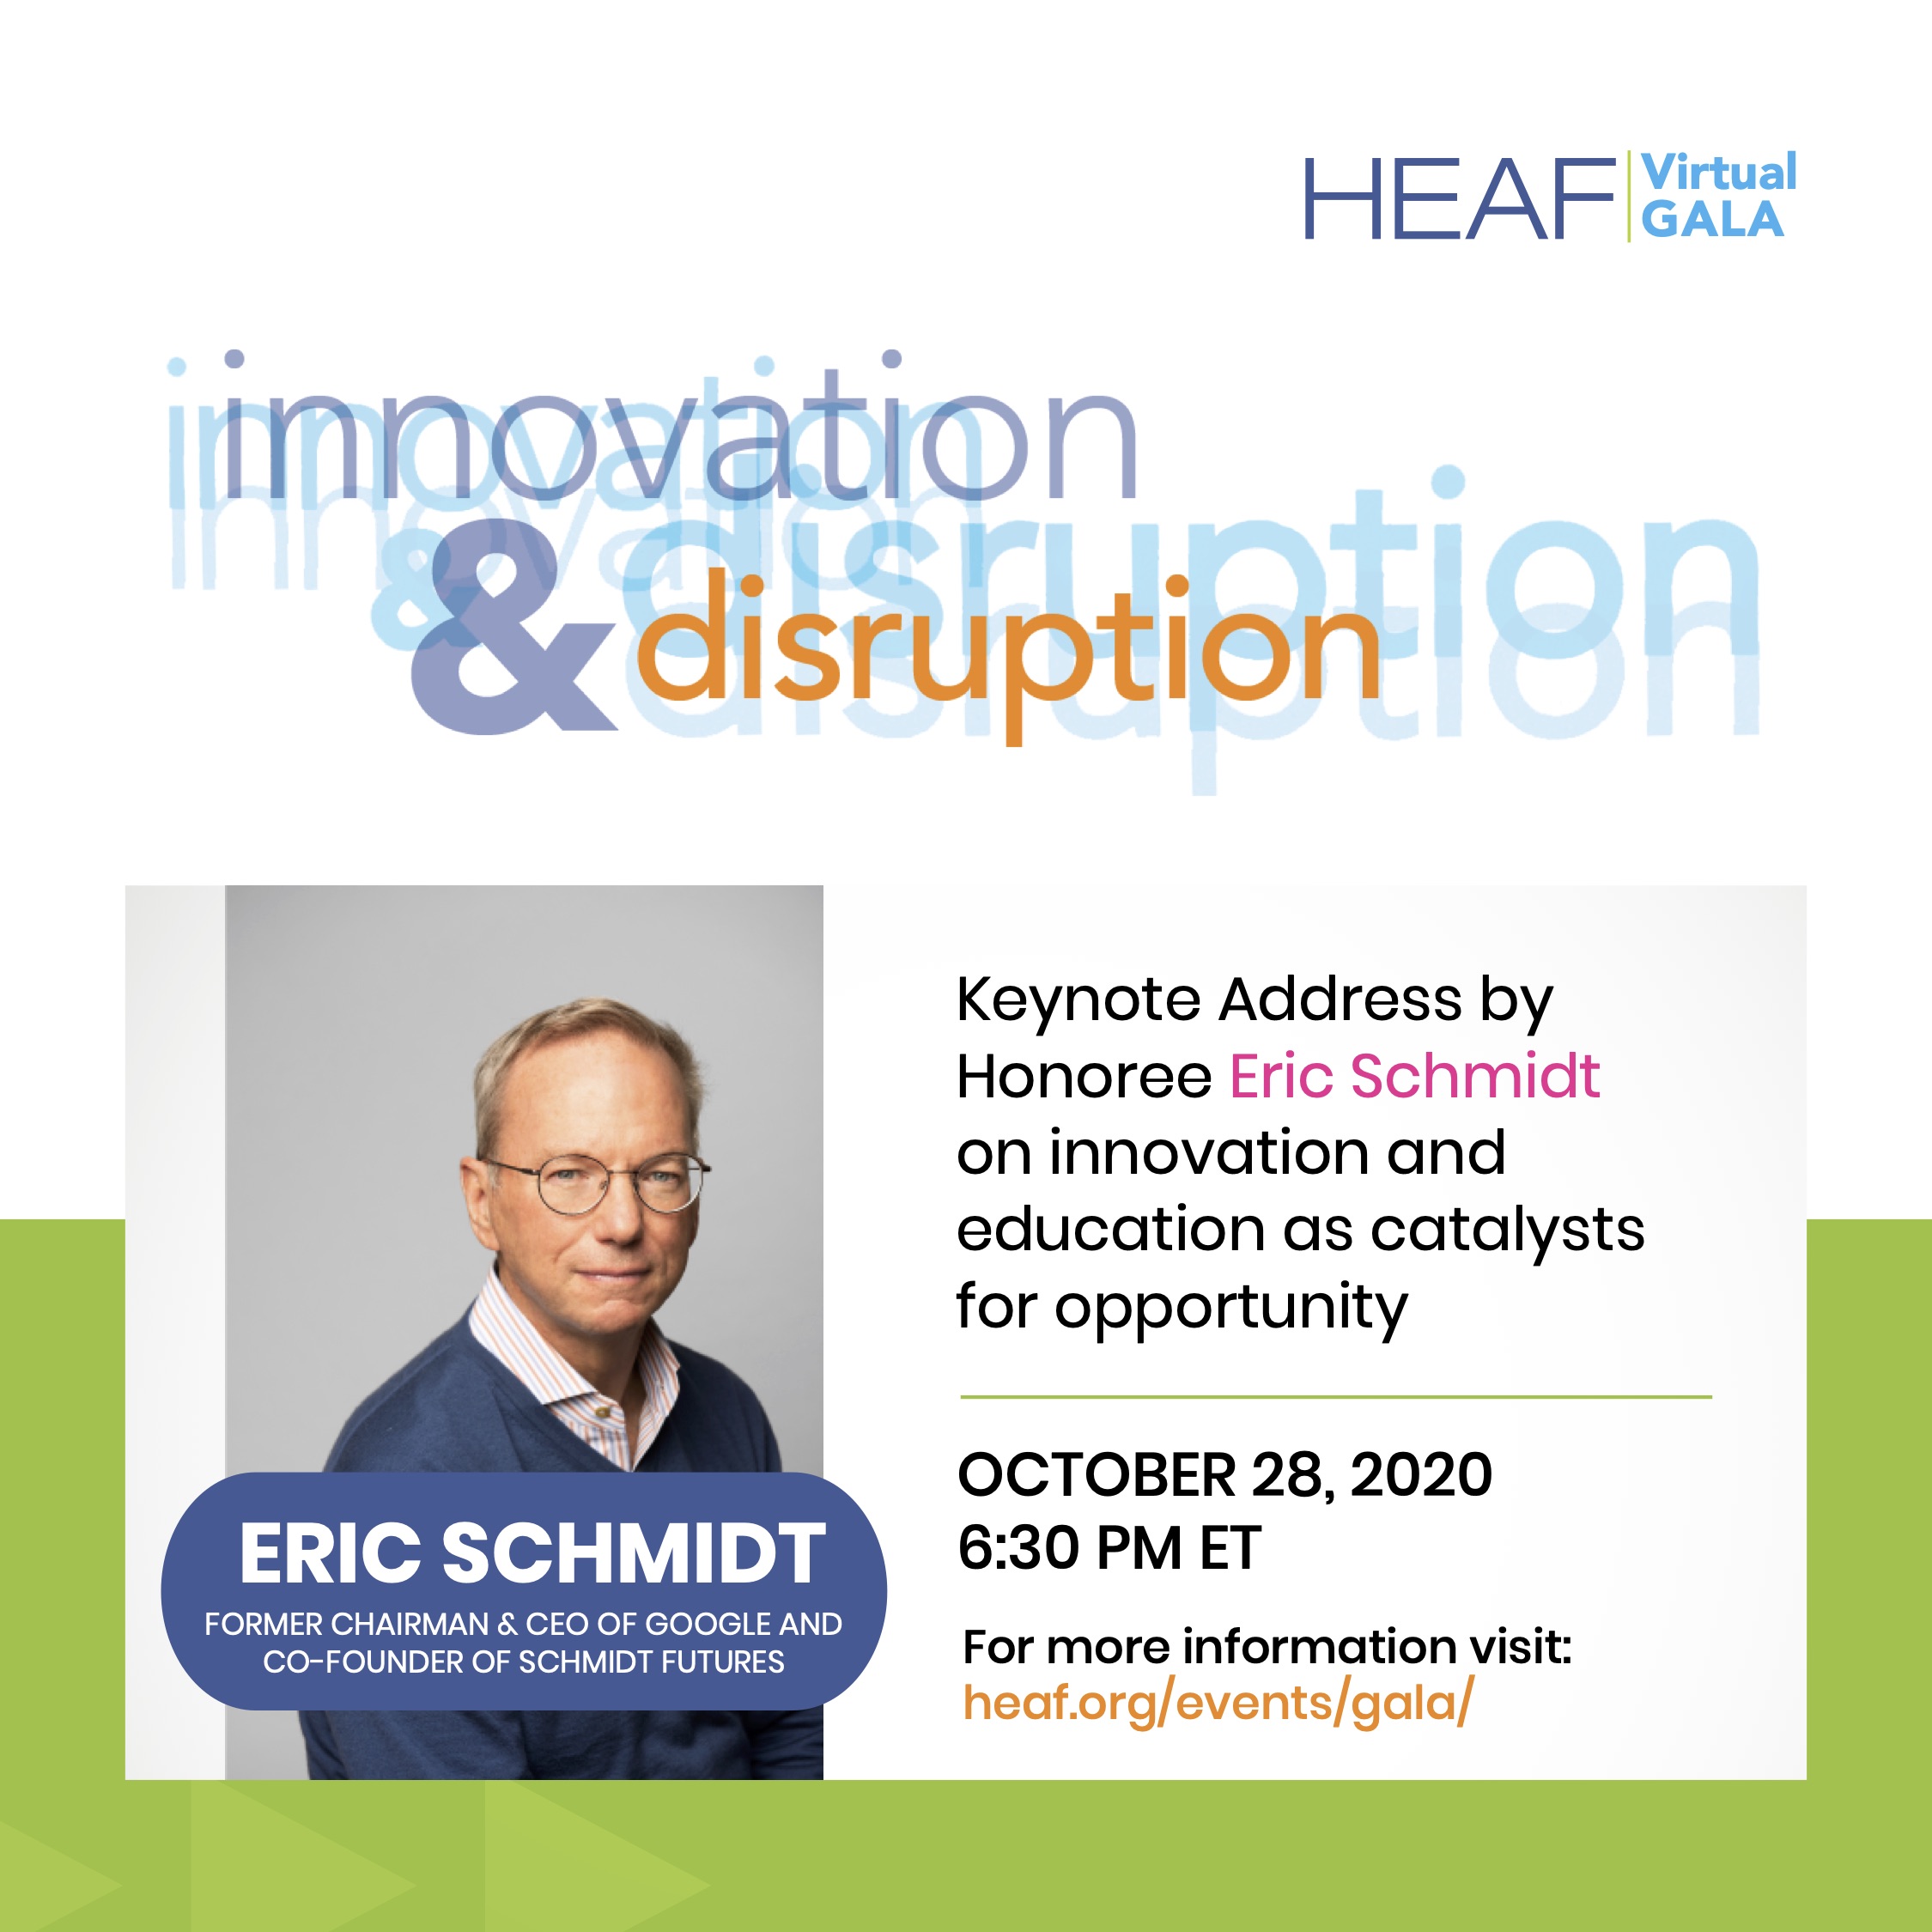 October 28th, 2020, 6:30 PM; Keynote address by Honoree Eric Schmidt on innovation and education as catalysts for opportunity.